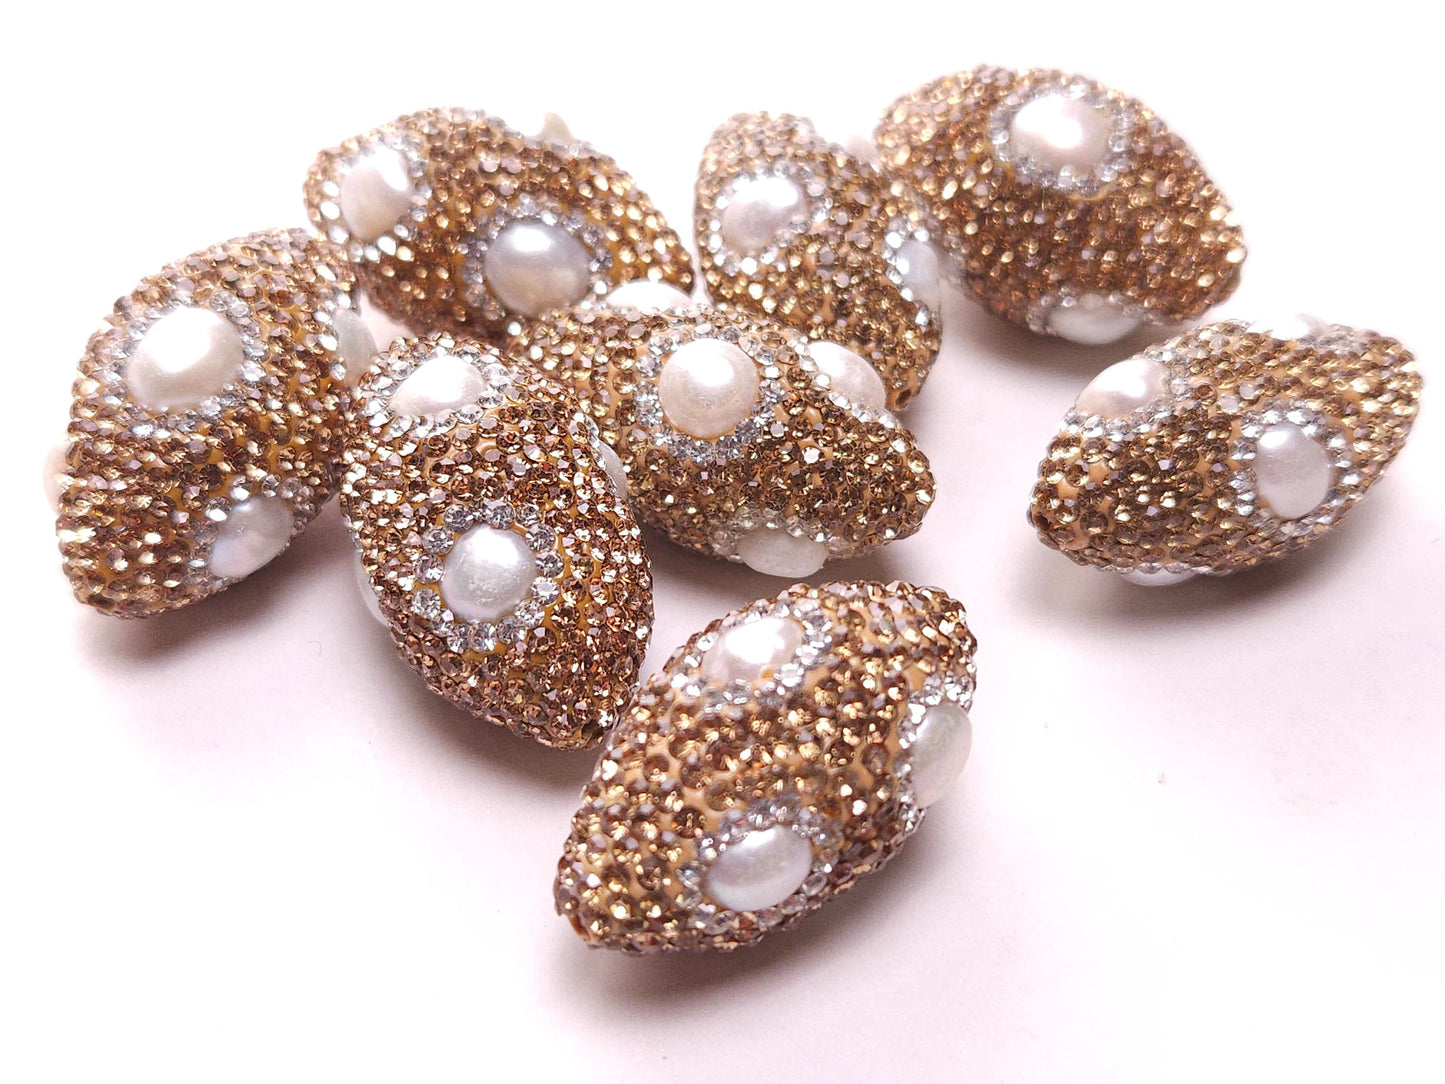 Freshwater Pearl with Gold Crystal Pave Rhinestone Handmade Fancy Focal Bead, 18x30mm, 1 pc, Jewelry Making Bling Bead